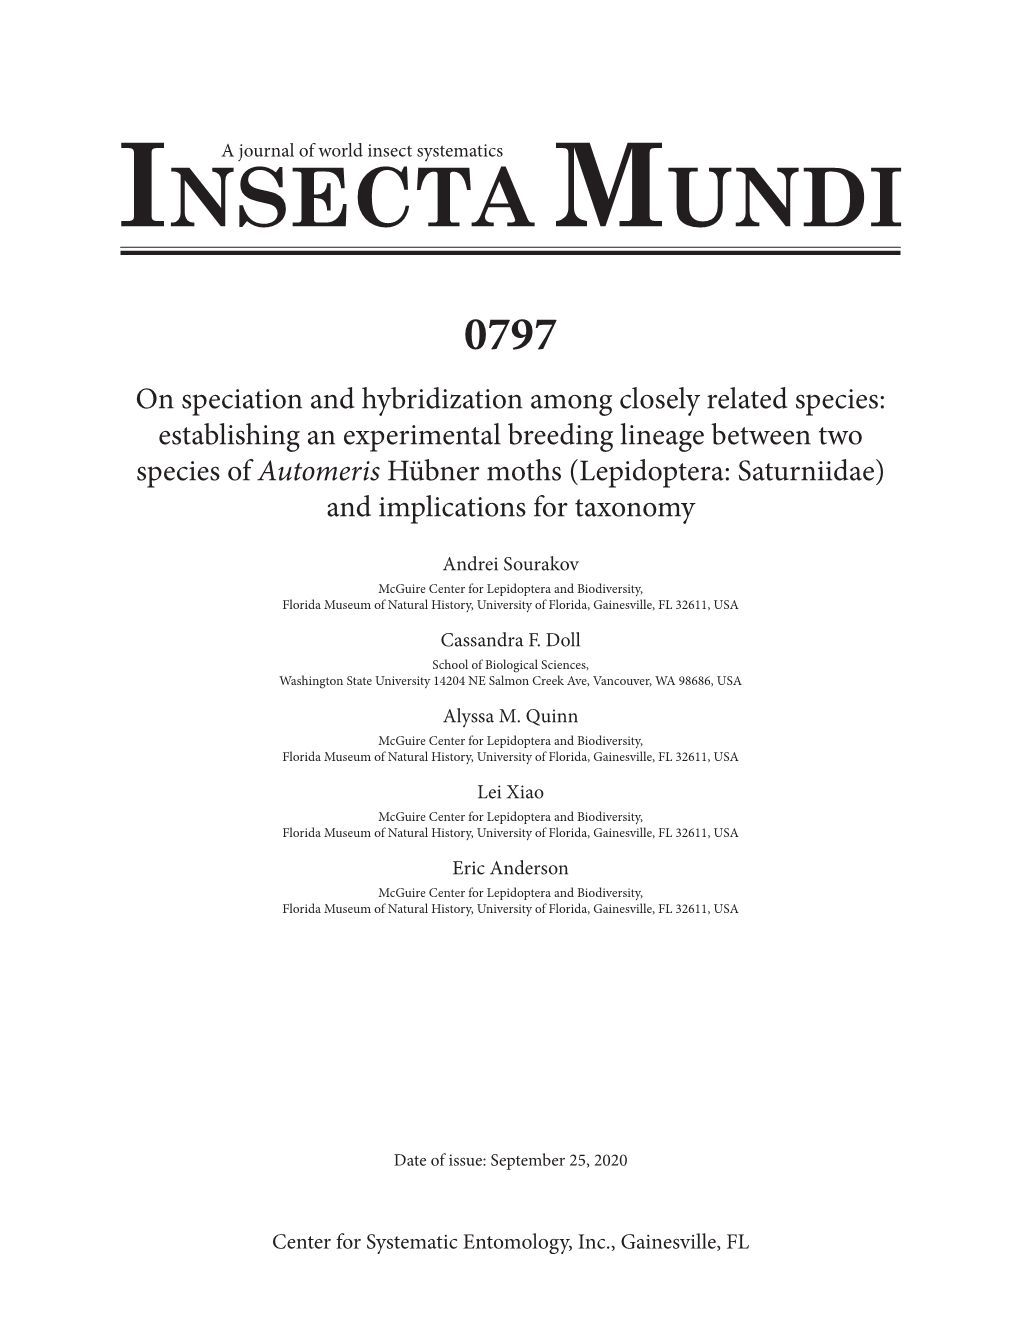 Automeris Hübner Moths (Lepidoptera: Saturniidae) and Implications for Taxonomy